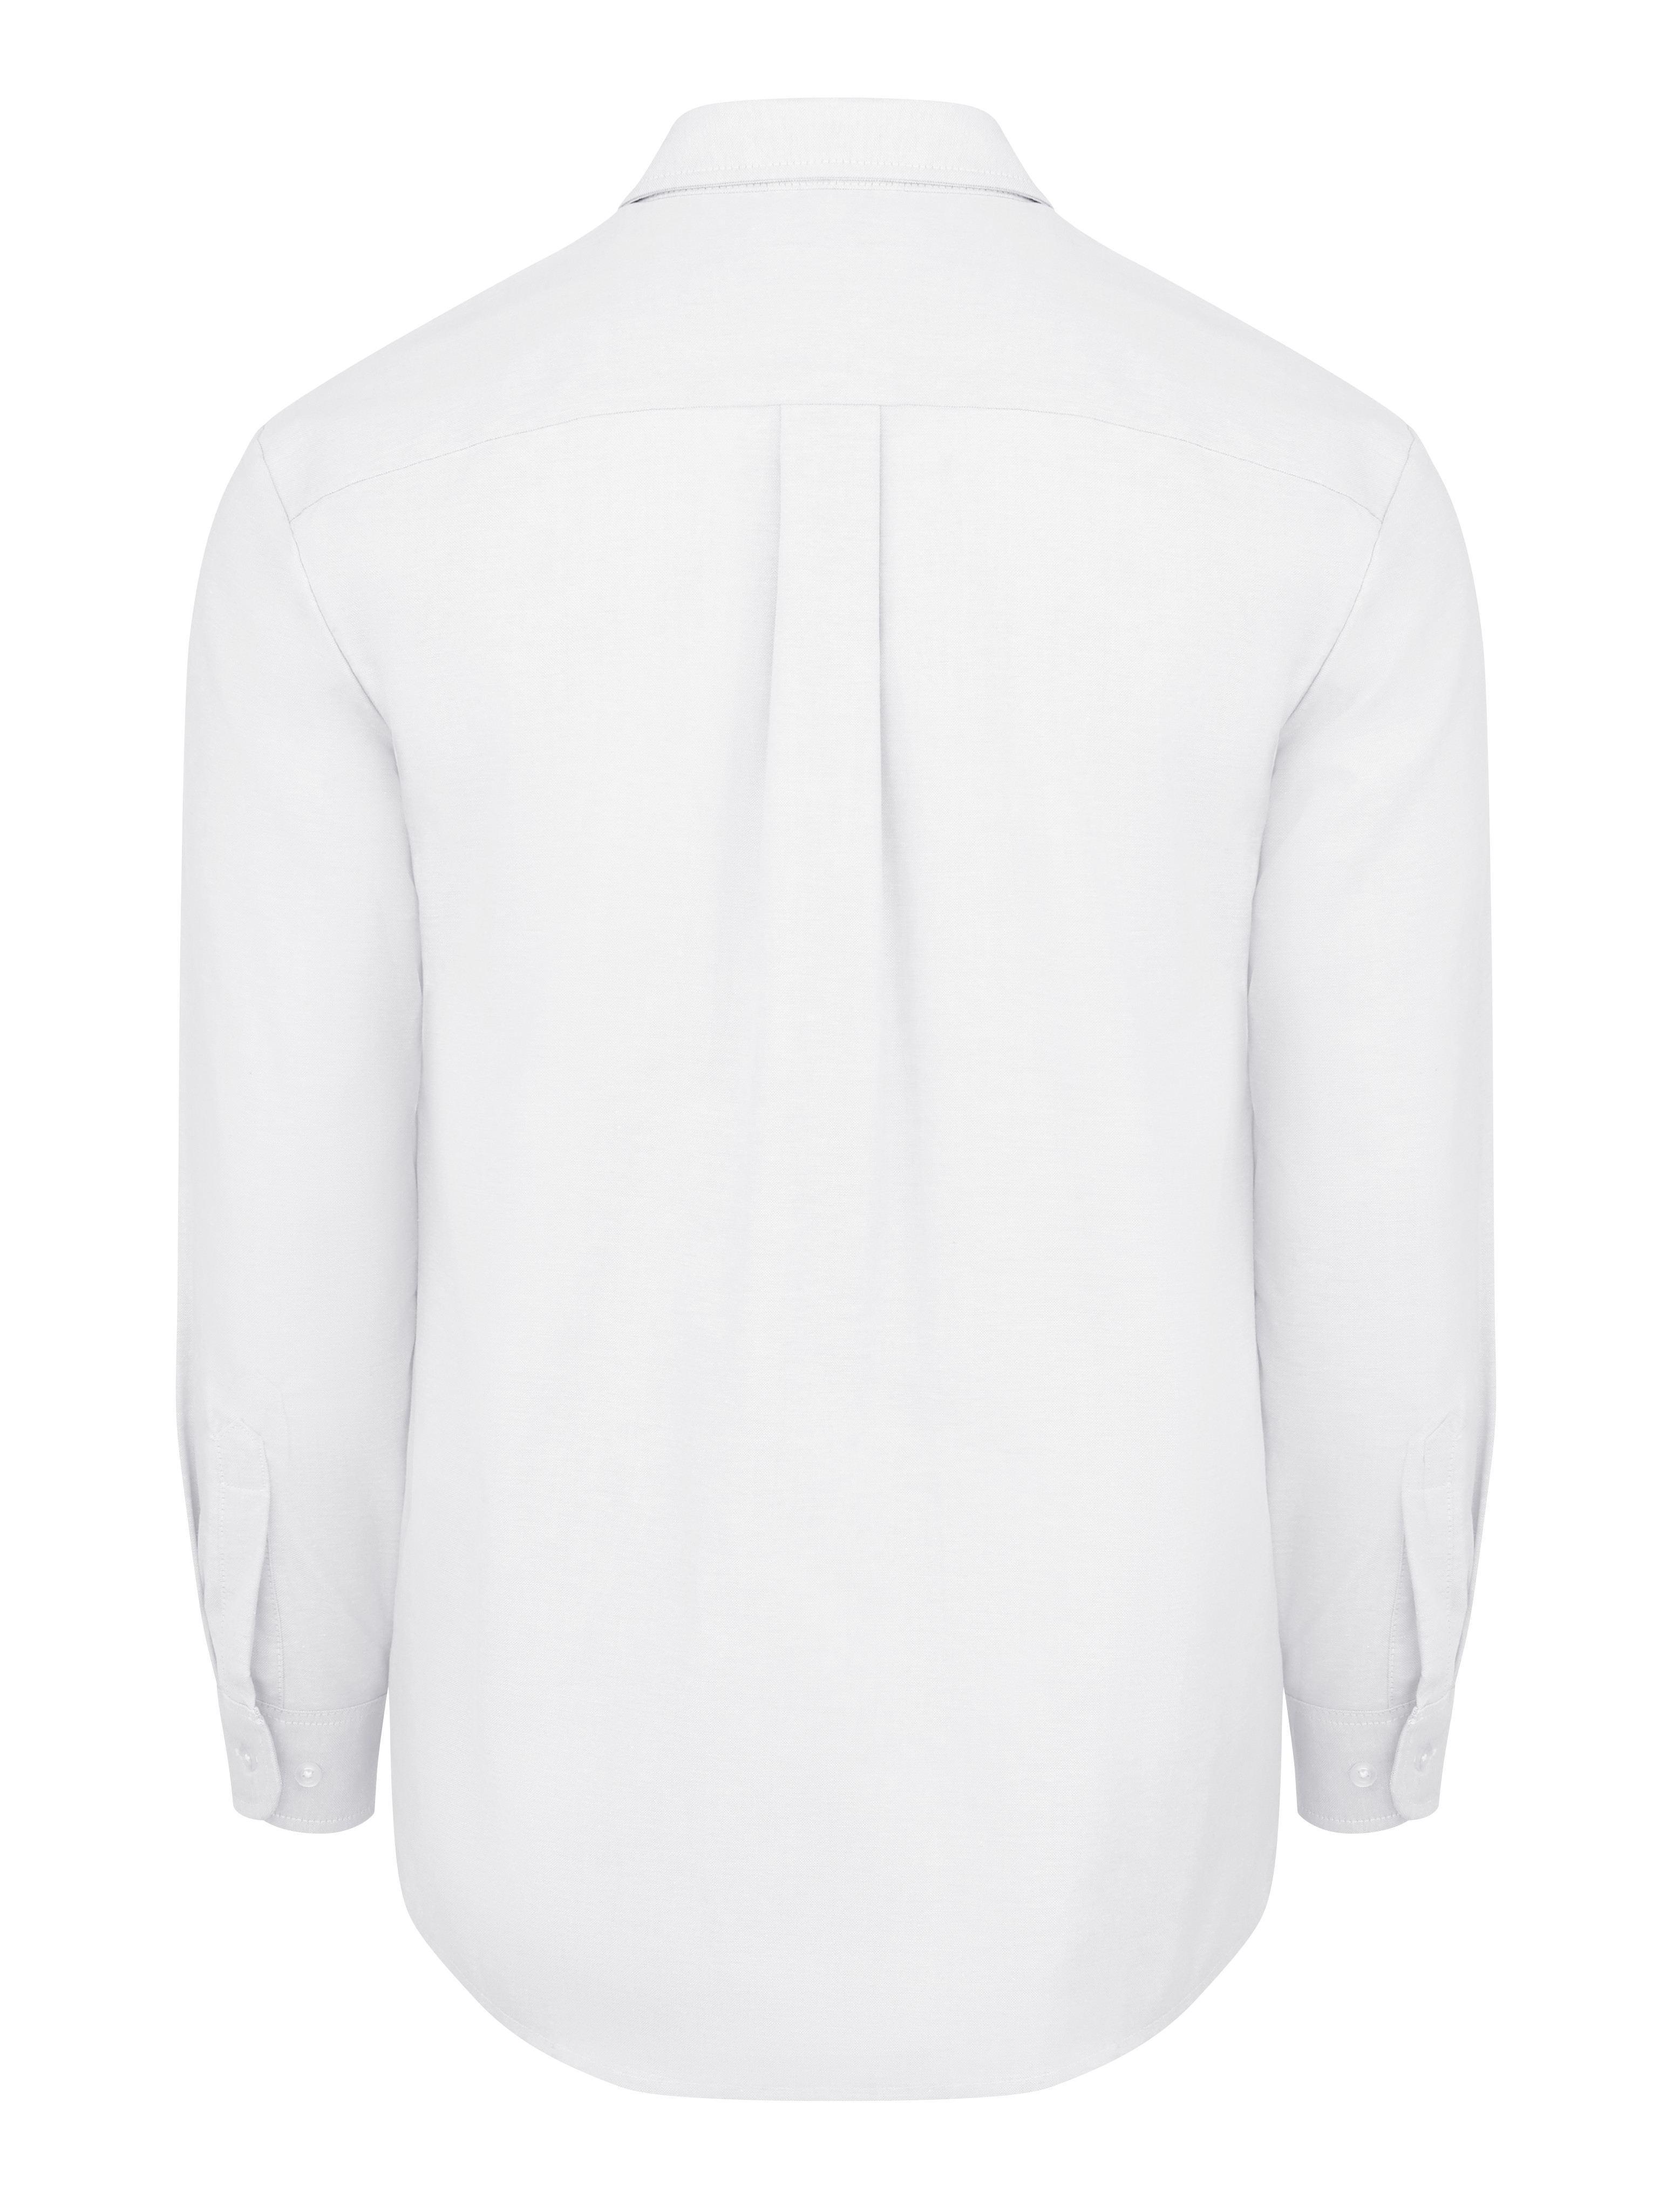 Picture of Dickies® SSS3 Men's Button-Down Long-Sleeve Oxford Shirt